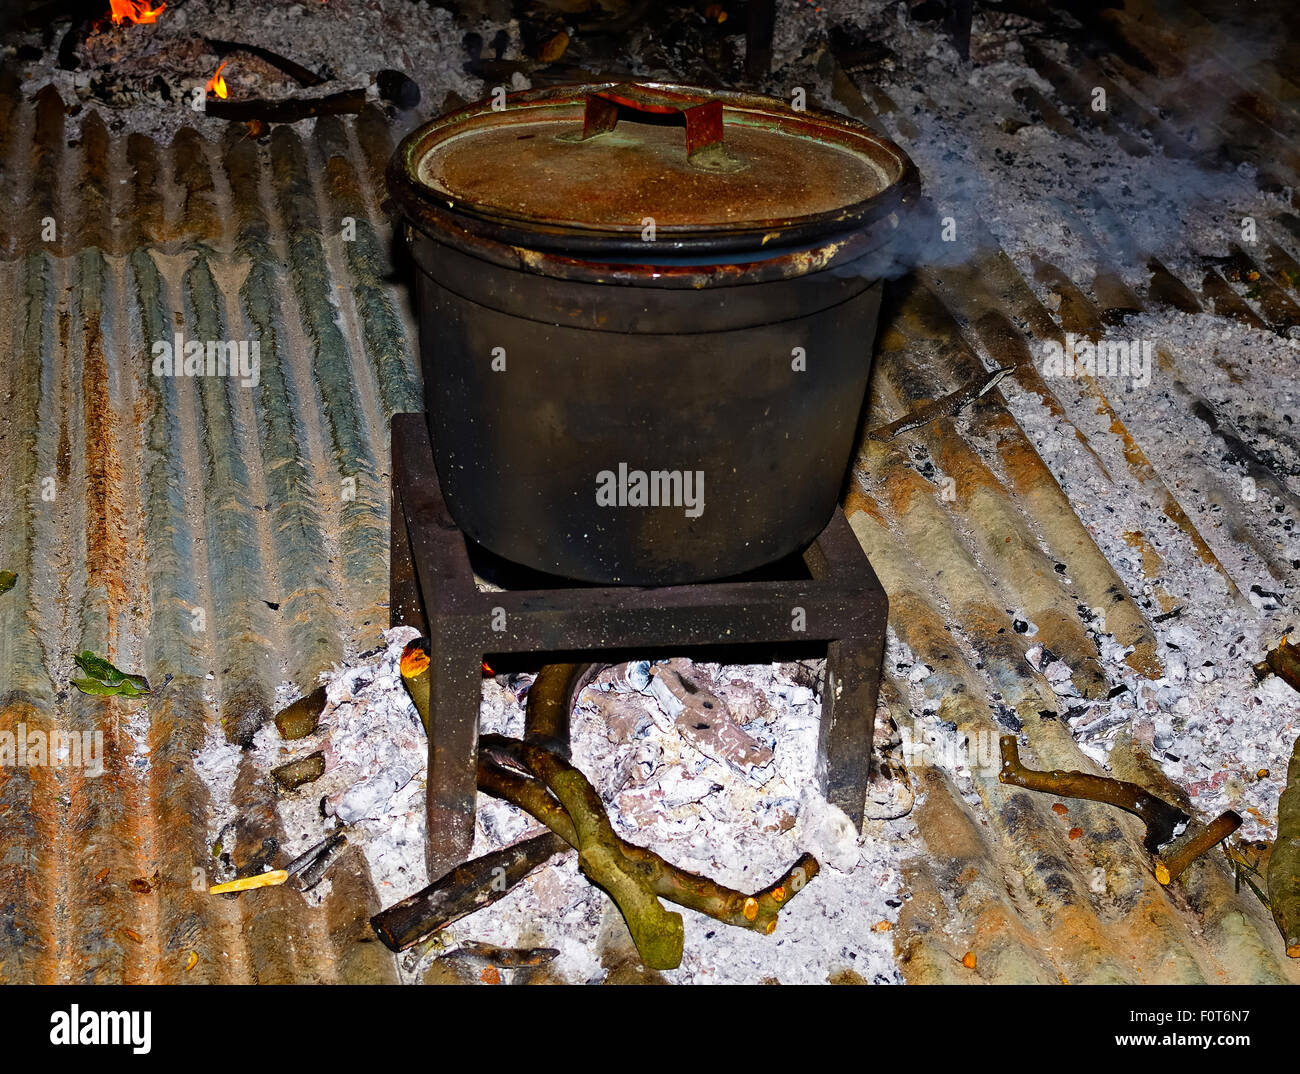 Cauldron Fire Cooking vegetables with a big iron cauldron over burning wood Stock Photo